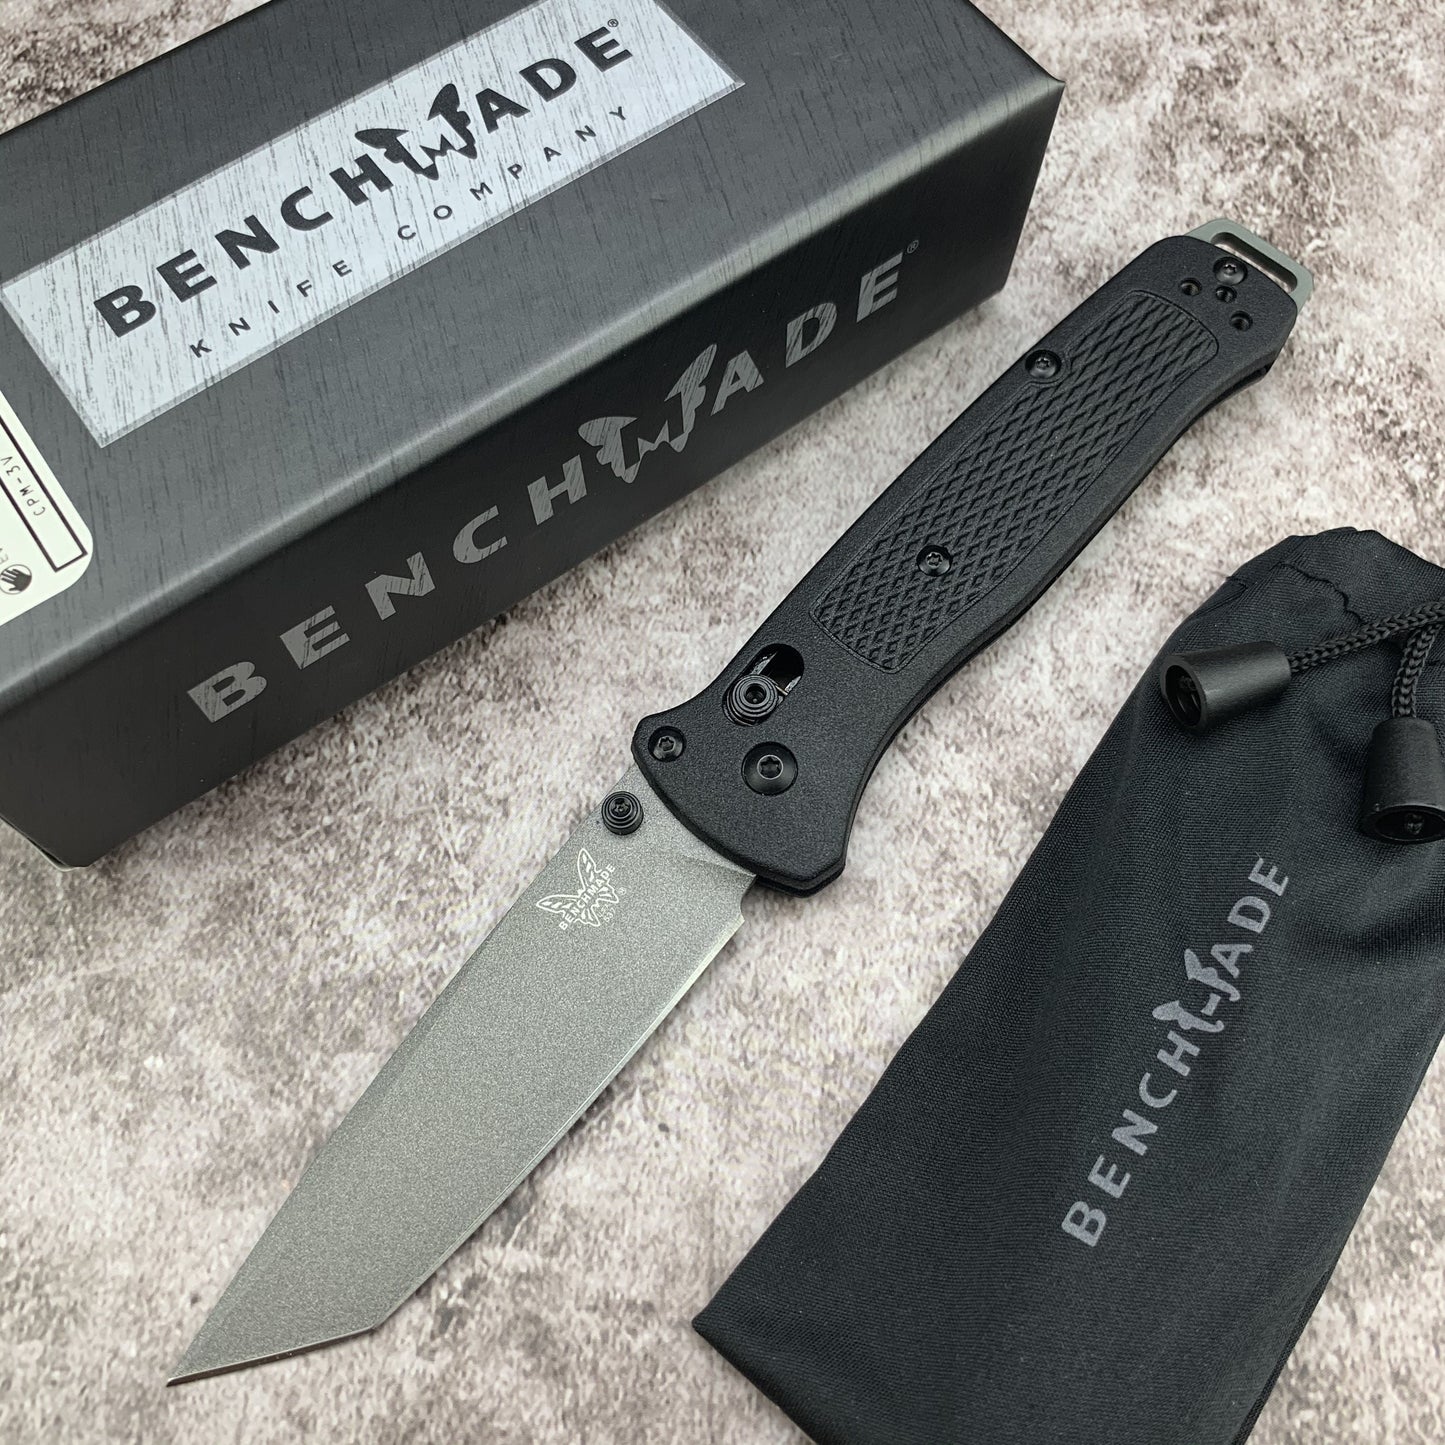 Benchmade - Bailout 537, EDC Tactical Folding Knife, Tanto Blade, Manual Open, Axis Locking Mechanism